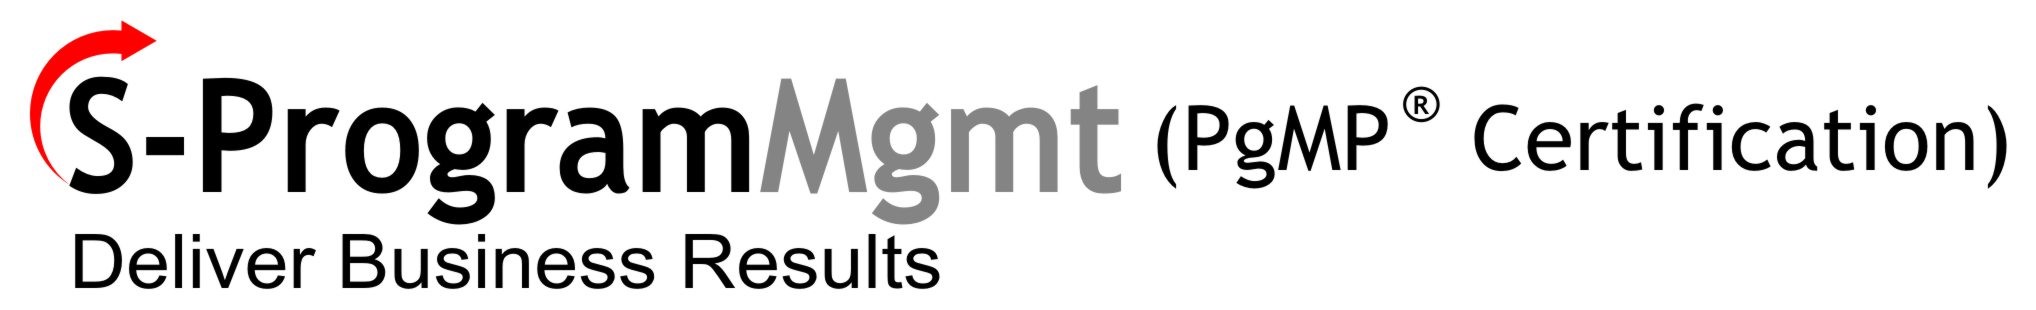 Program Management for Business Results (Aligned to PgMP® Certification)